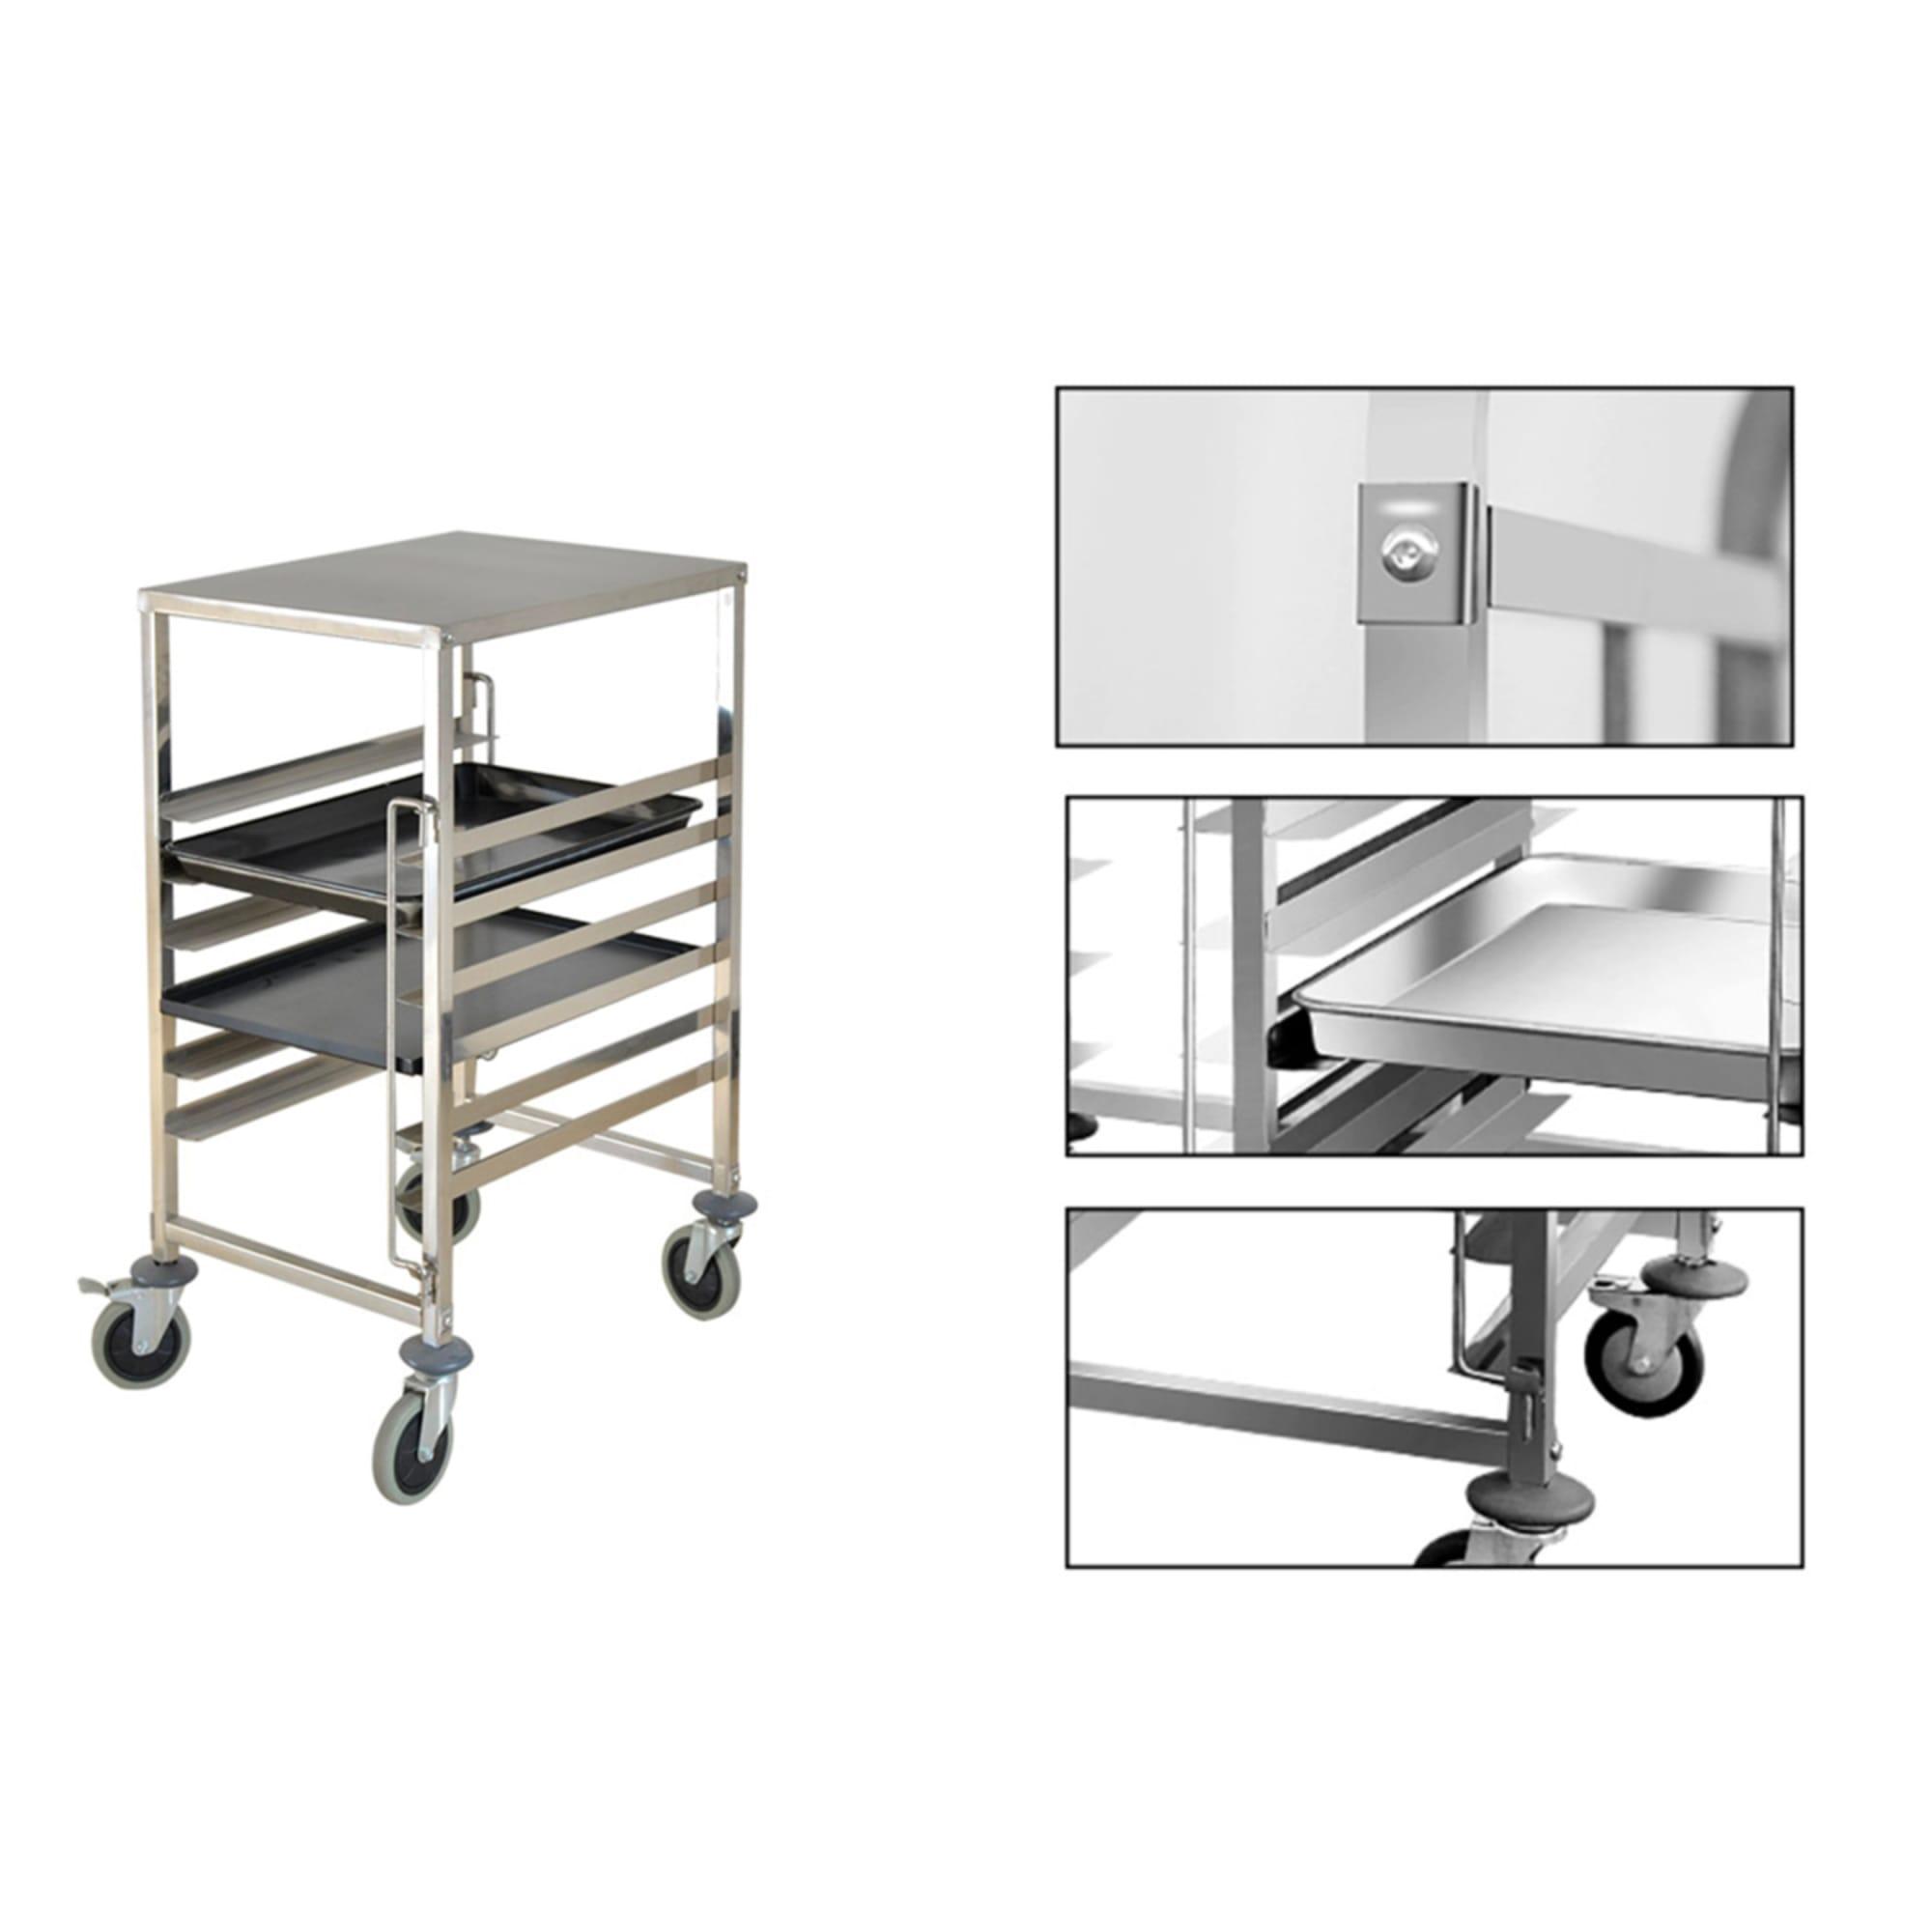 Soga Stainless Steel Gastronorm Trolley 7 Tier Suits 60x40cm Trays Set of 2 Image 4